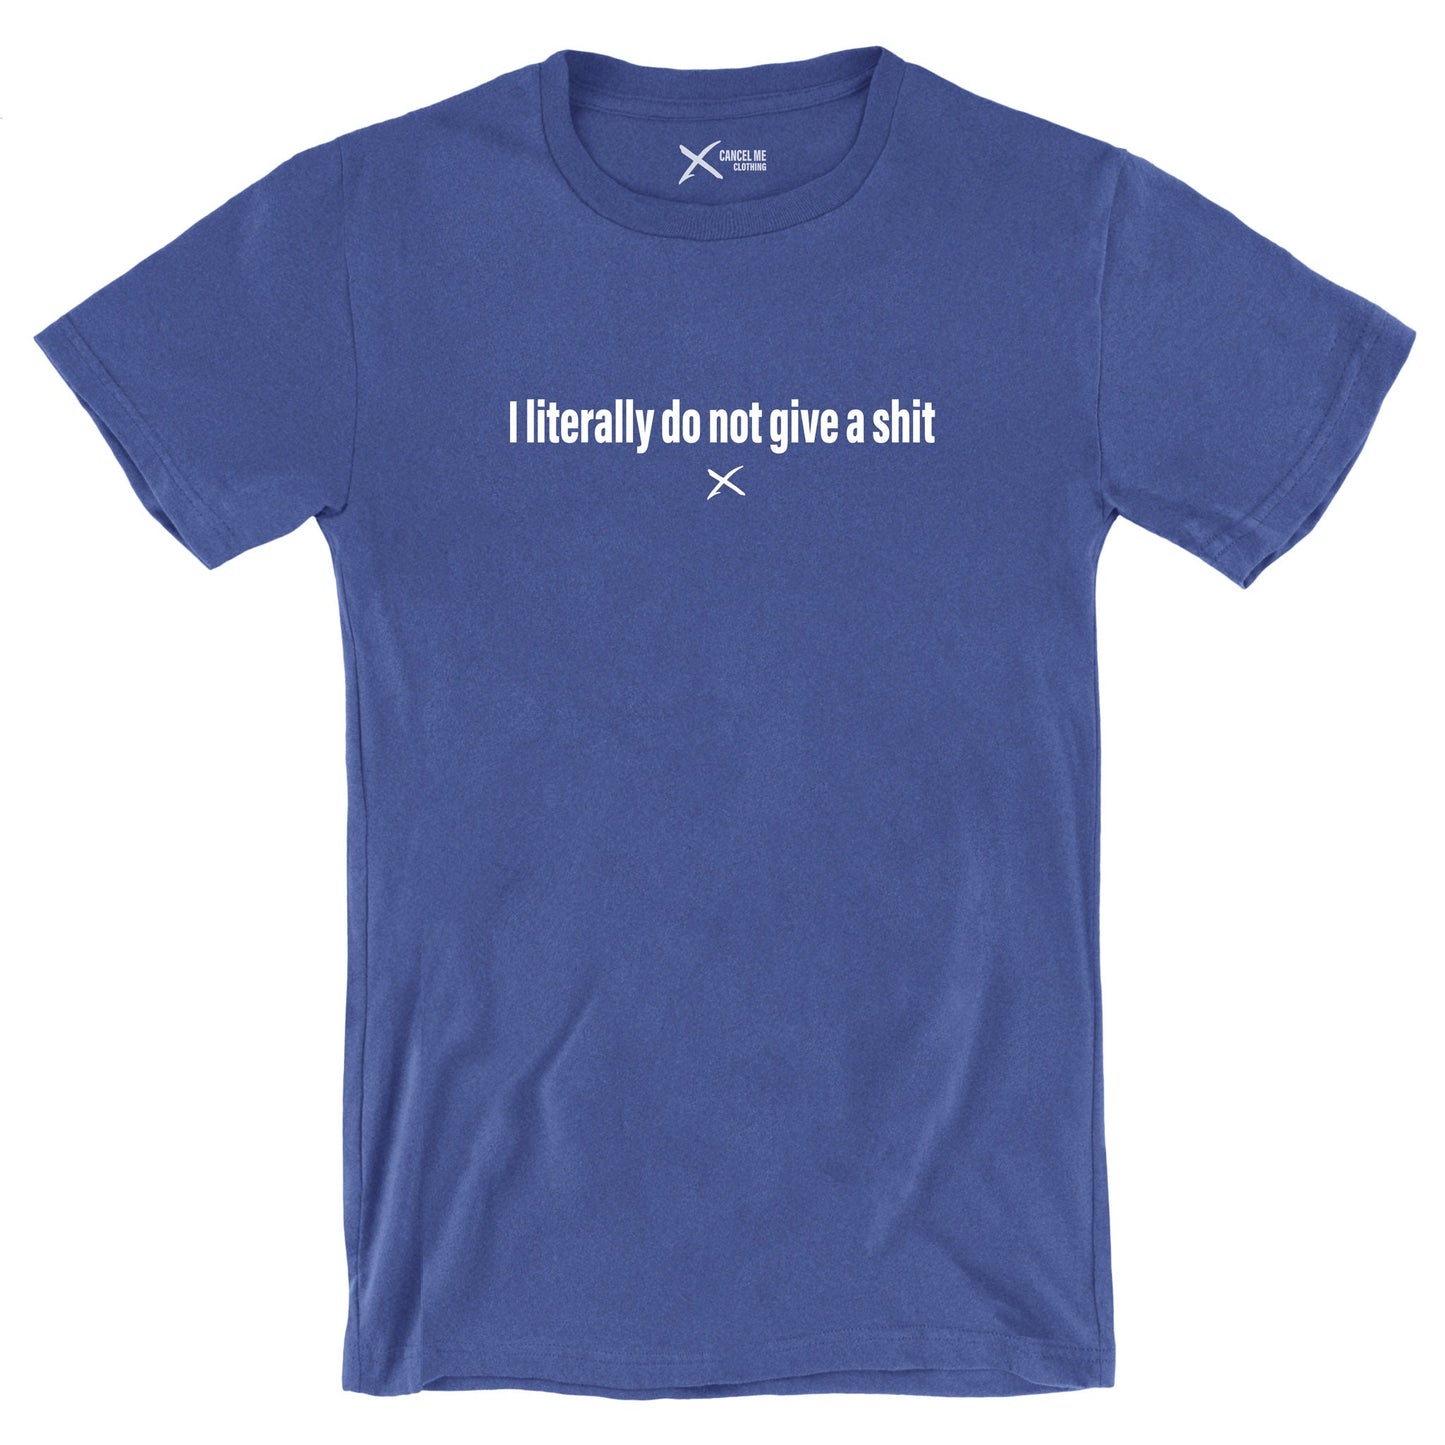 I literally do not give a shit - Shirt